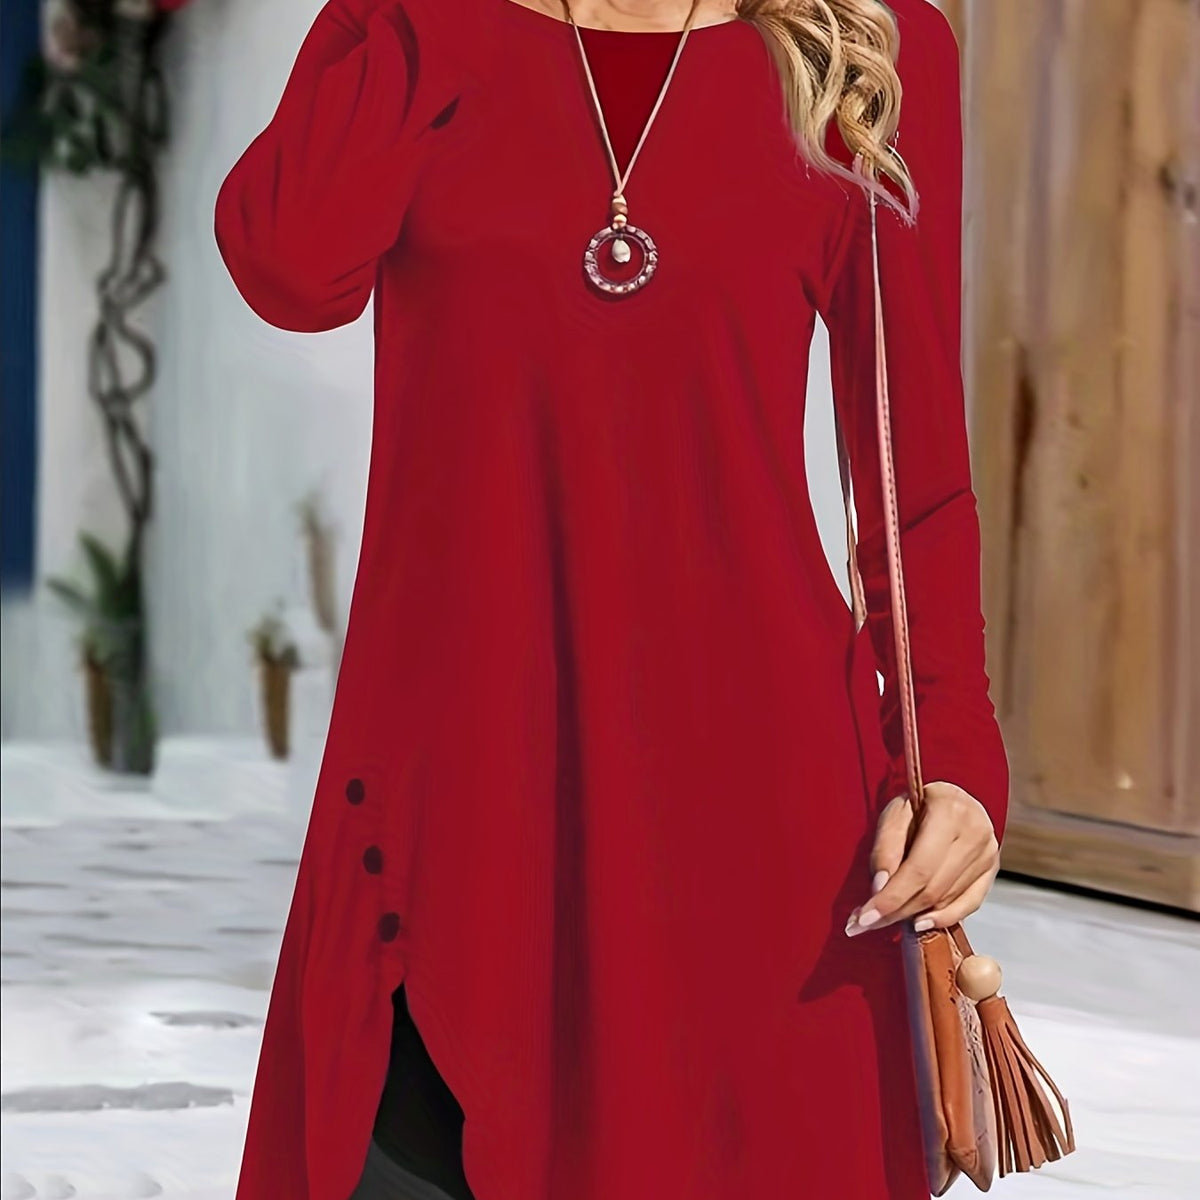 Asymmetrical Hem Solid Dress, Casual Crew Neck Long Sleeve Dress With Buttons, Women's Clothing